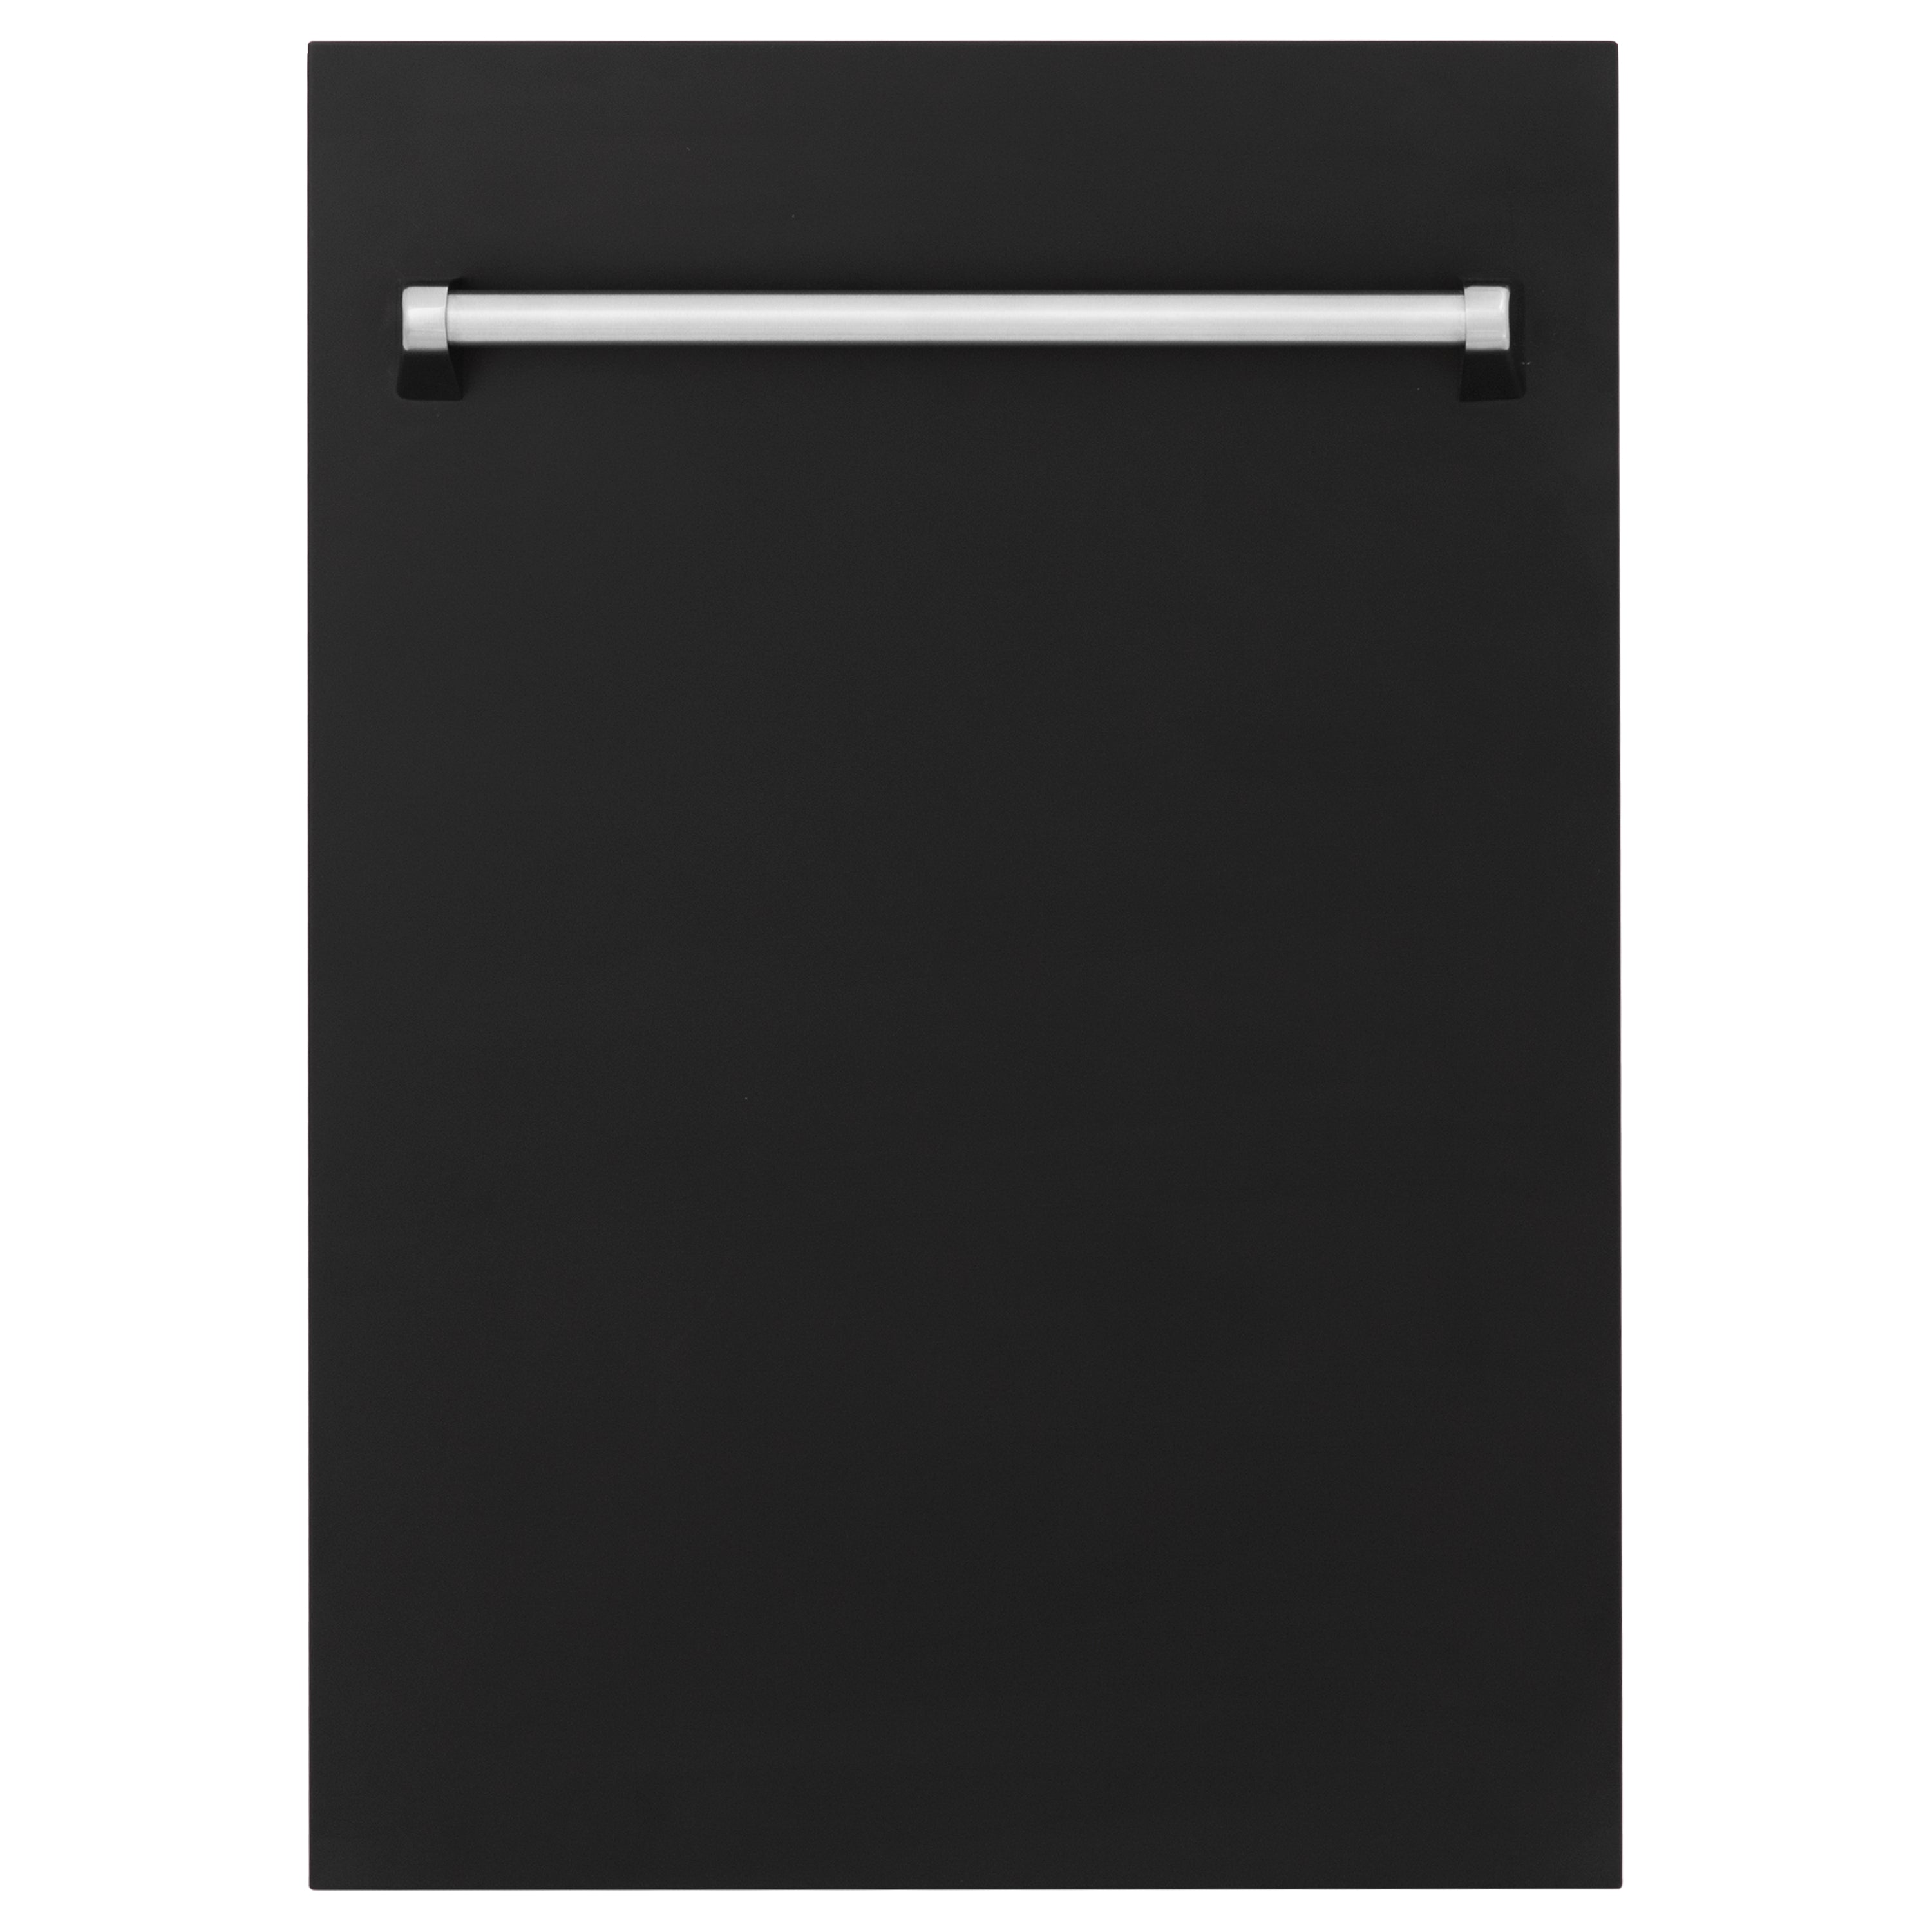 ZLINE 18" Tallac Dishwasher Panel in Black Matte with Traditional Handle (DPV-BLM-18)